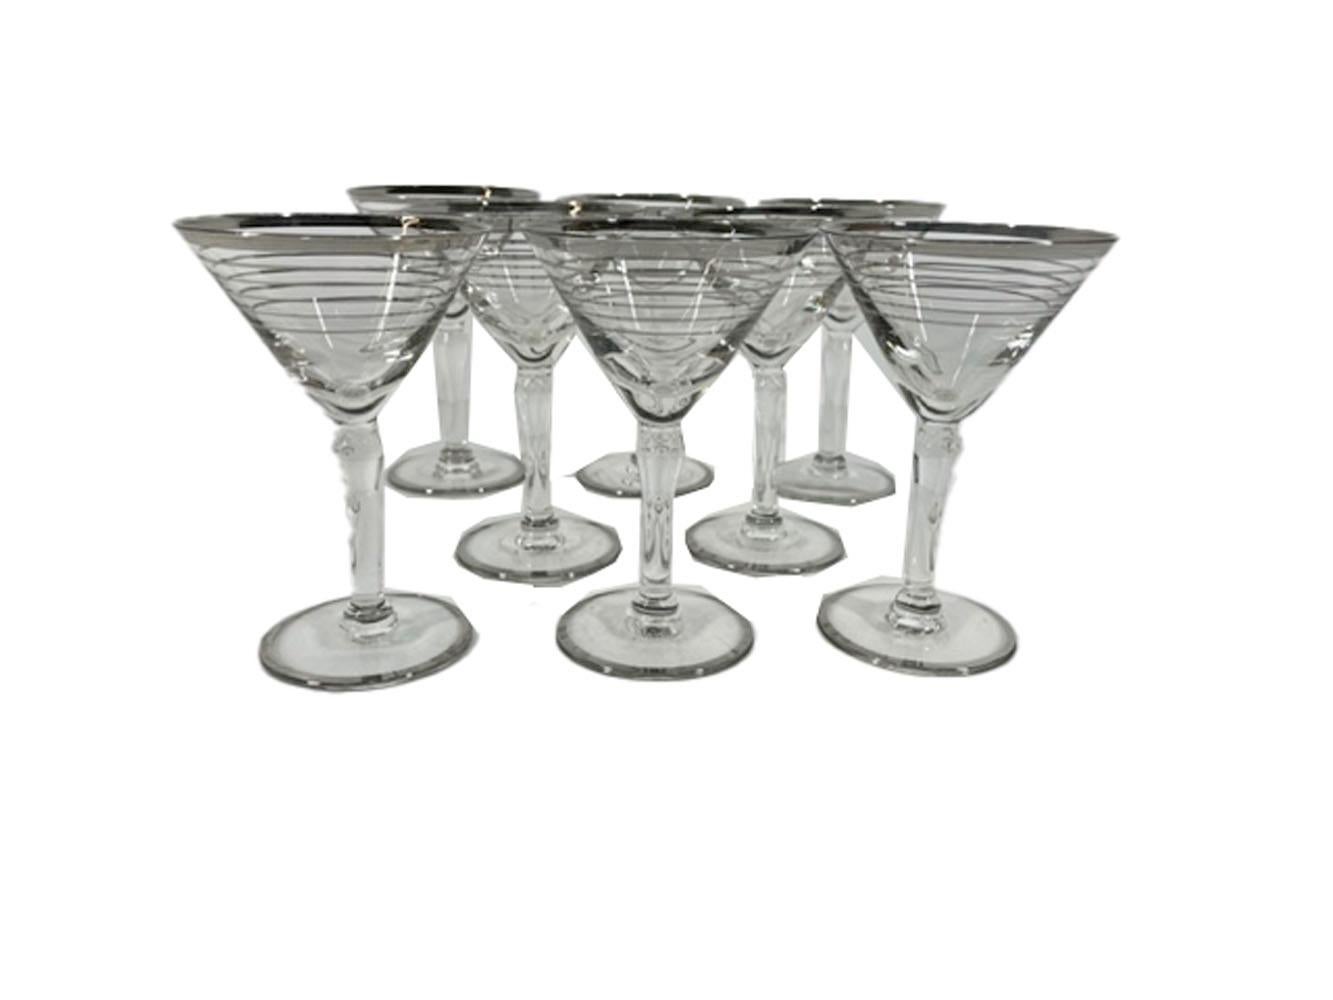 Eight Art Deco cocktail / martini glasses with shaped stems and decorated with a platinum band at the rim and foot as well as having platinum lines around the conical bowl. Very good condition.